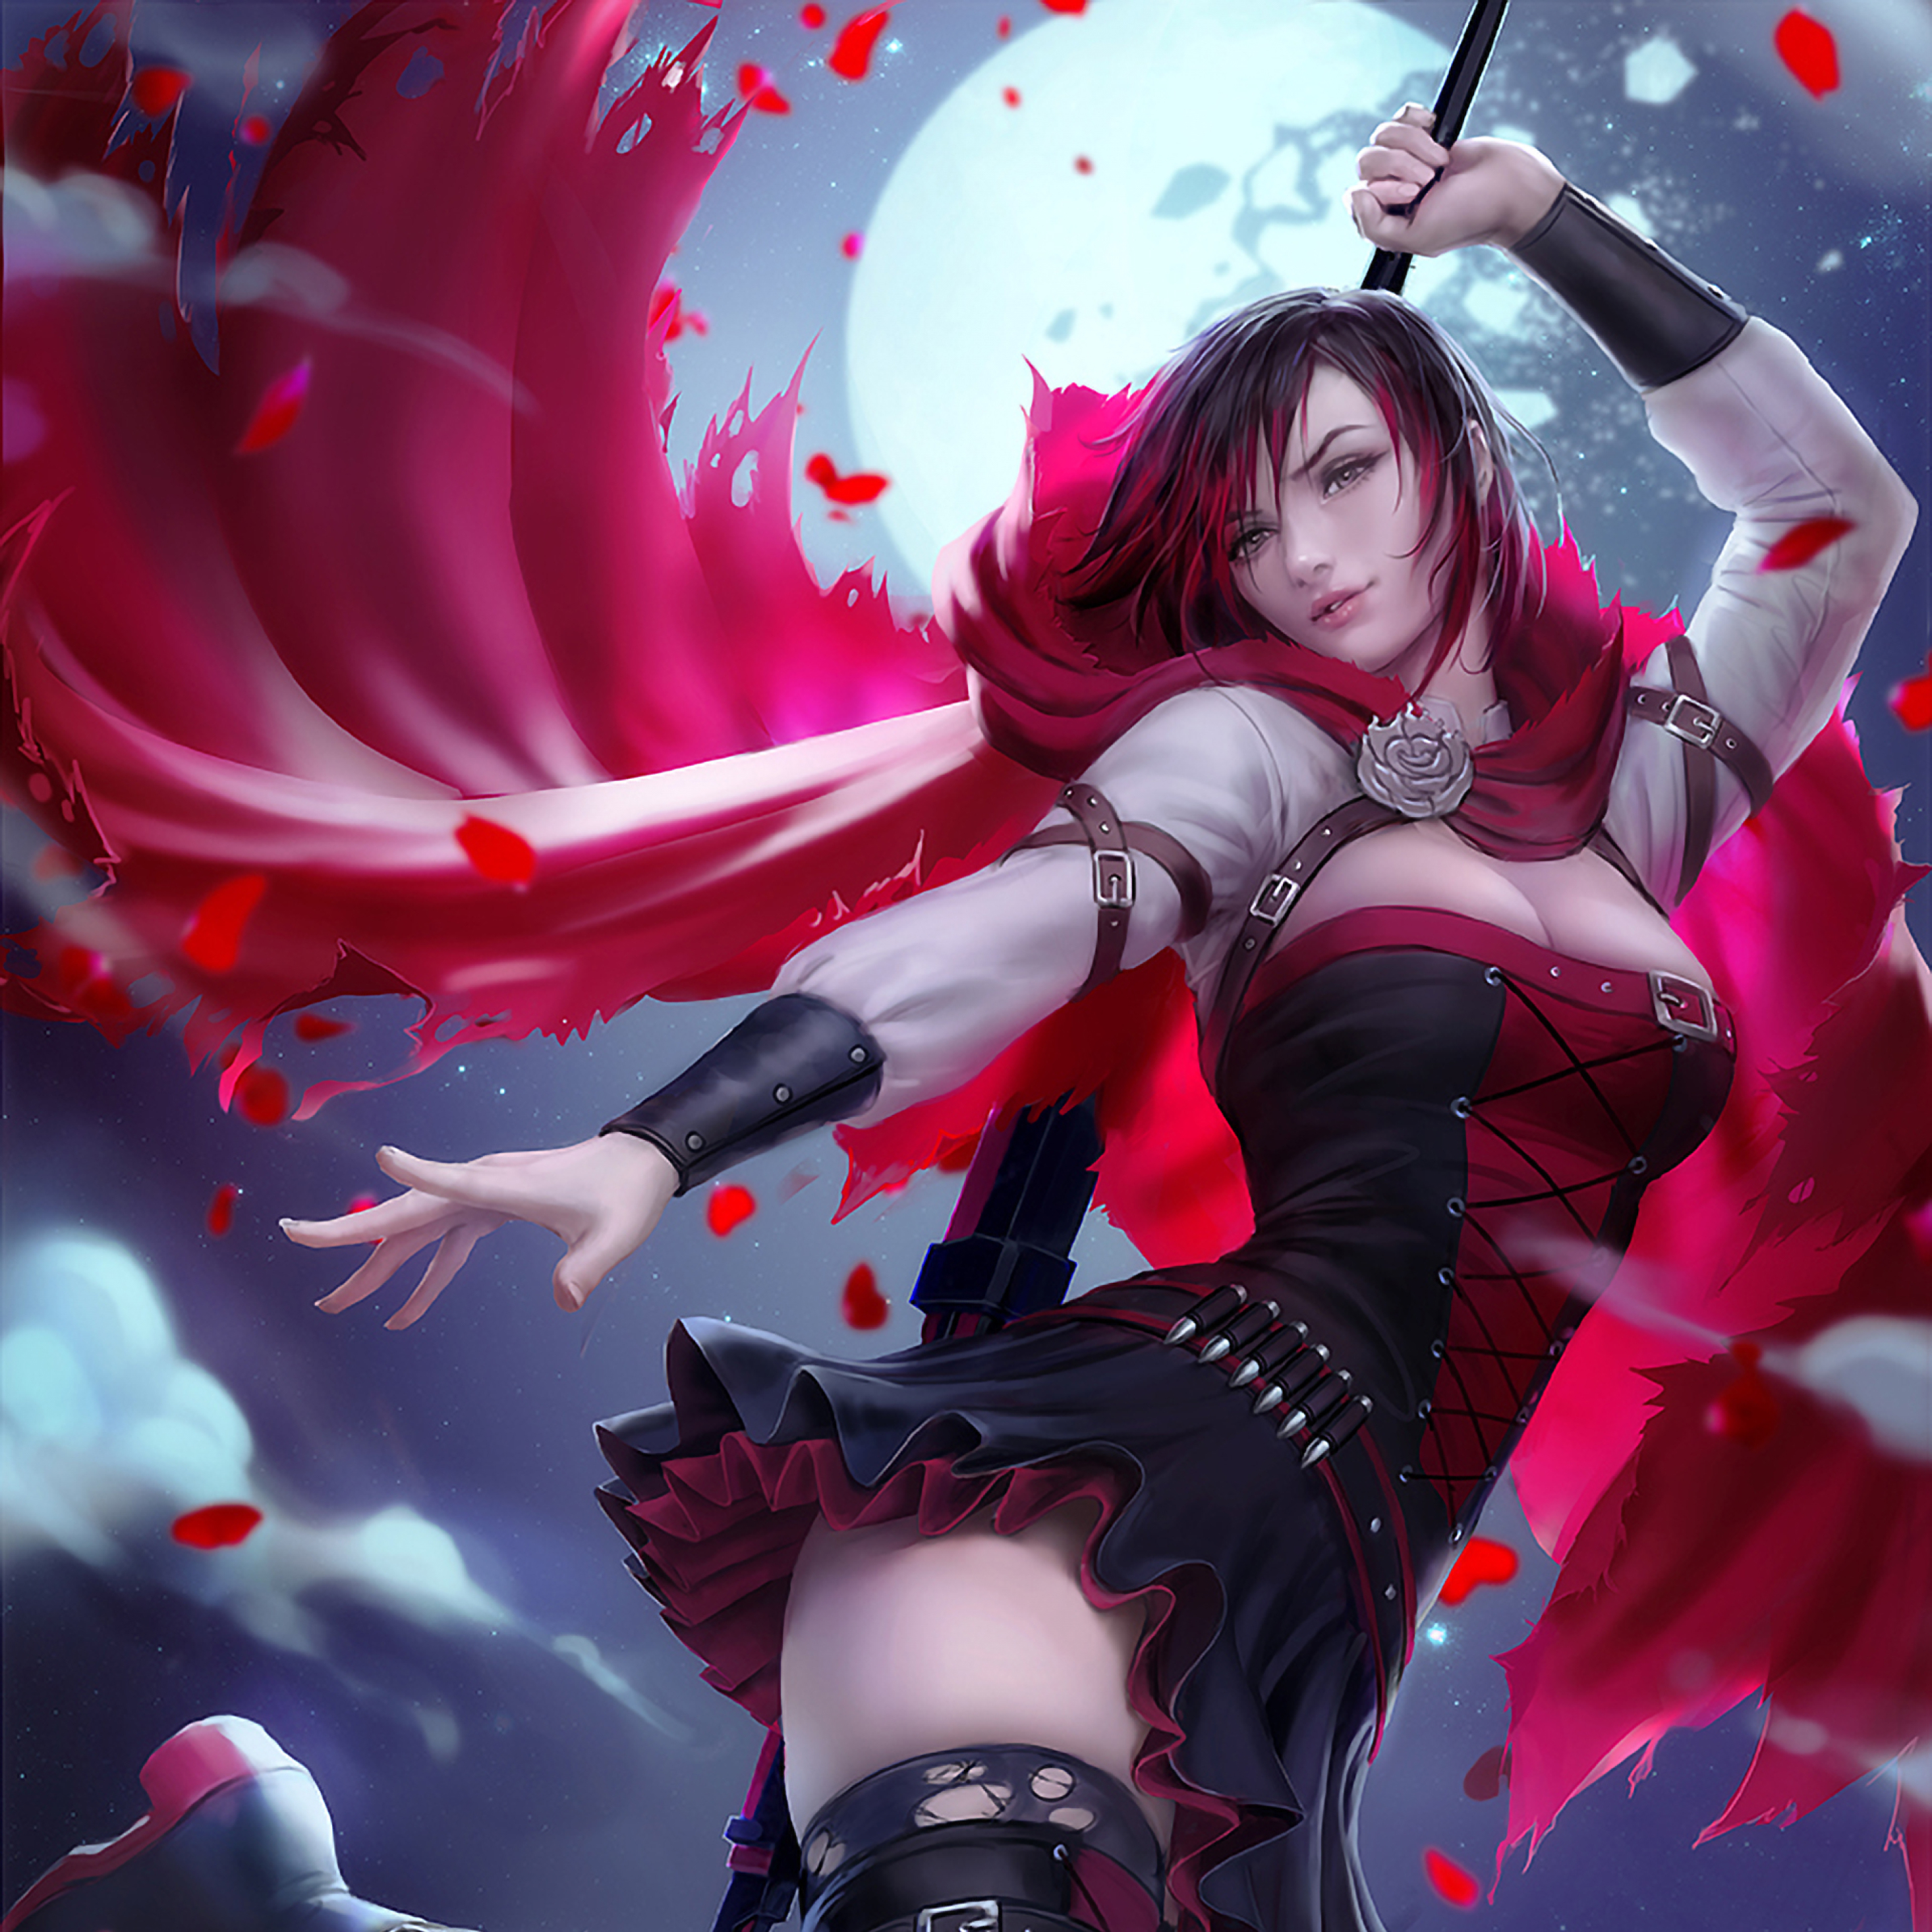 2932x2932 Ruby Rose Rwby Ipad Pro Retina Display Wallpaper Hd Anime 4k Wallpapers Images Photos And Background